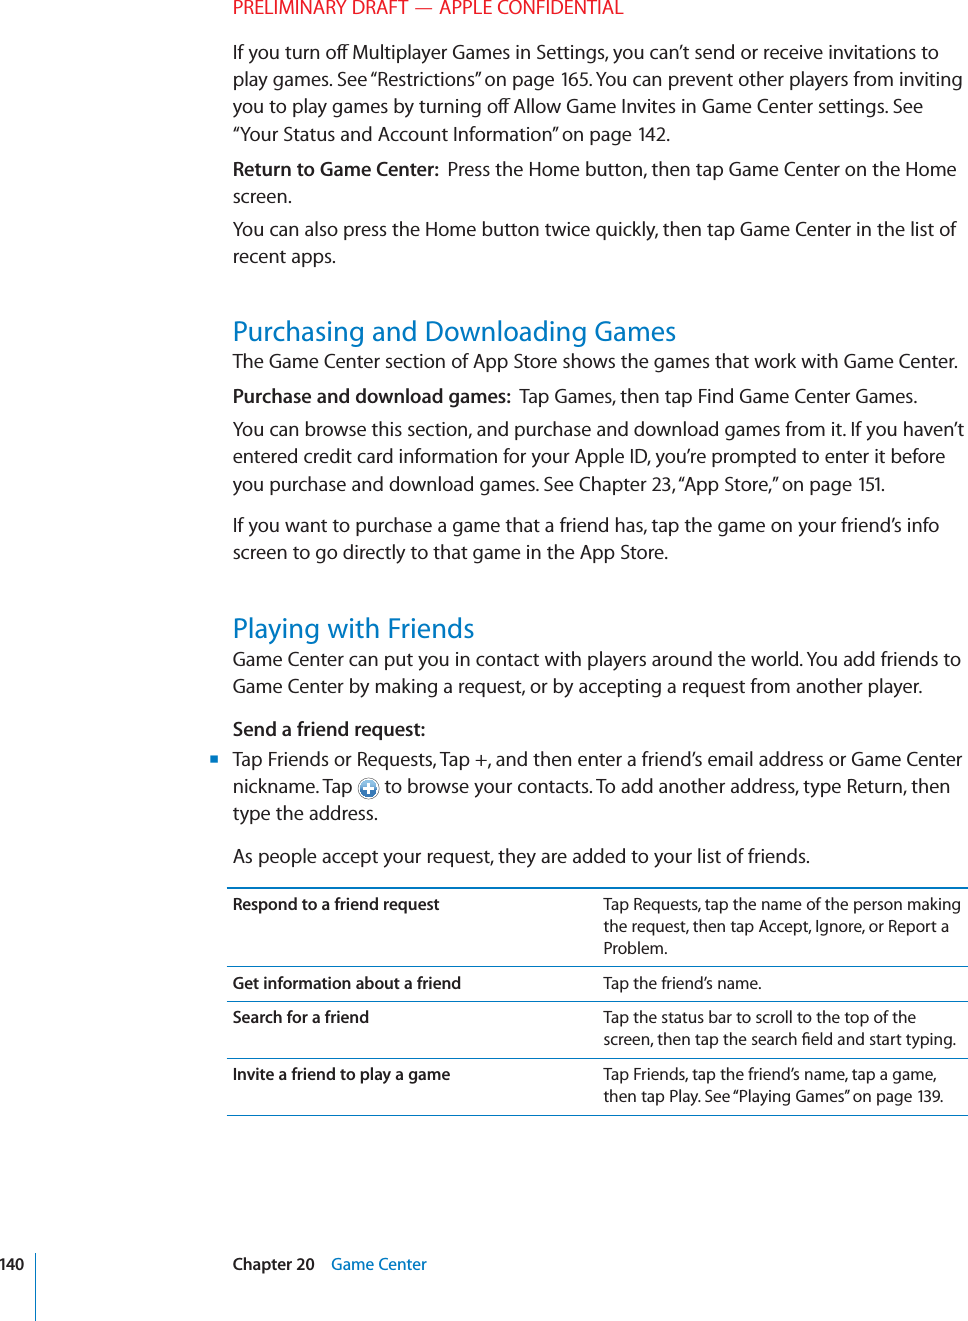 PRELIMINARY DRAFT — APPLE CONFIDENTIALIf you turn o∂ Multiplayer Games in Settings, you can’t send or receive invitations to play games. See “Restrictions” on page 165. You can prevent other players from inviting you to play games by turning o∂ Allow Game Invites in Game Center settings. See “Your Status and Account Information” on page 142.Return to Game Center:  Press the Home button, then tap Game Center on the Home screen.You can also press the Home button twice quickly, then tap Game Center in the list of recent apps.Purchasing and Downloading GamesThe Game Center section of App Store shows the games that work with Game Center.Purchase and download games:  Tap Games, then tap Find Game Center Games. You can browse this section, and purchase and download games from it. If you haven’t entered credit card information for your Apple ID, you’re prompted to enter it before you purchase and download games. See Chapter 23, “App Store,” on page 151.If you want to purchase a game that a friend has, tap the game on your friend’s info screen to go directly to that game in the App Store. Playing with FriendsGame Center can put you in contact with players around the world. You add friends to Game Center by making a request, or by accepting a request from another player.Send a friend request:Tap Friends or Requests, Tap +, and then enter a friend’s email address or Game Center  Bnickname. Tap   to browse your contacts. To add another address, type Return, then type the address.As people accept your request, they are added to your list of friends.Respond to a friend request Tap Requests, tap the name of the person making the request, then tap Accept, Ignore, or Report a Problem.Get information about a friend Tap the friend’s name.Search for a friend Tap the status bar to scroll to the top of the screen, then tap the search ﬁeld and start typing.Invite a friend to play a game Tap Friends, tap the friend’s name, tap a game, then tap Play. See “Playing Games” on page 139.140 Chapter 20    Game Center